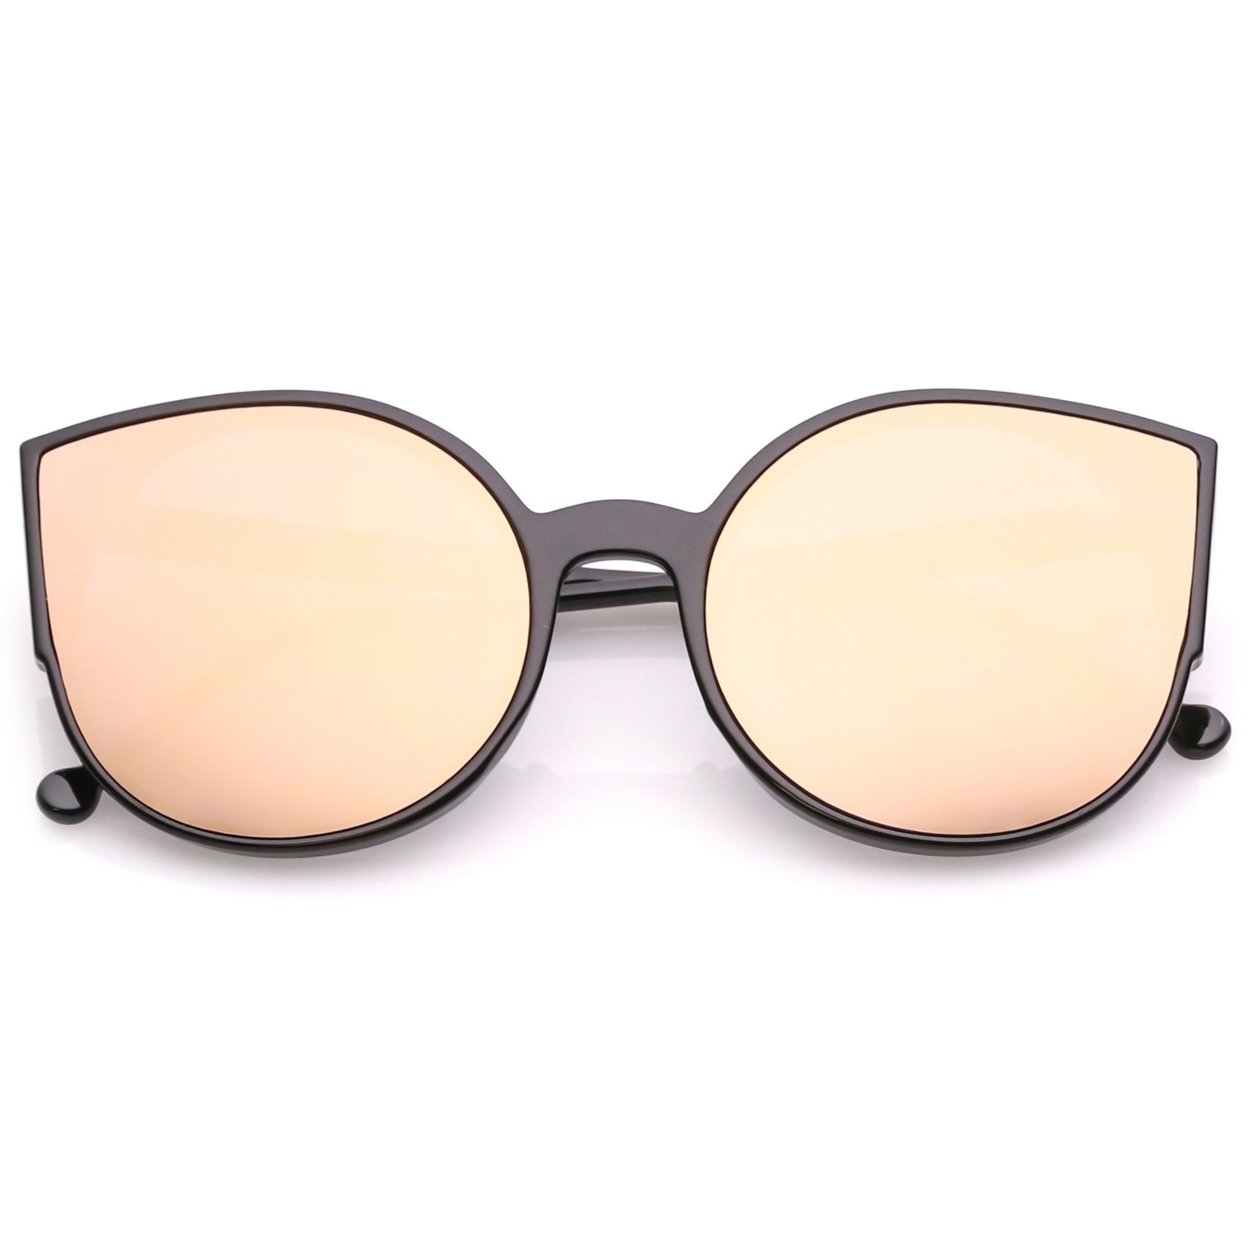 Women's Cat Eye Sunglasses With Slim Arms Round Colored Mirror Flat Lens 56mm - Tortoise / Gold Mirror